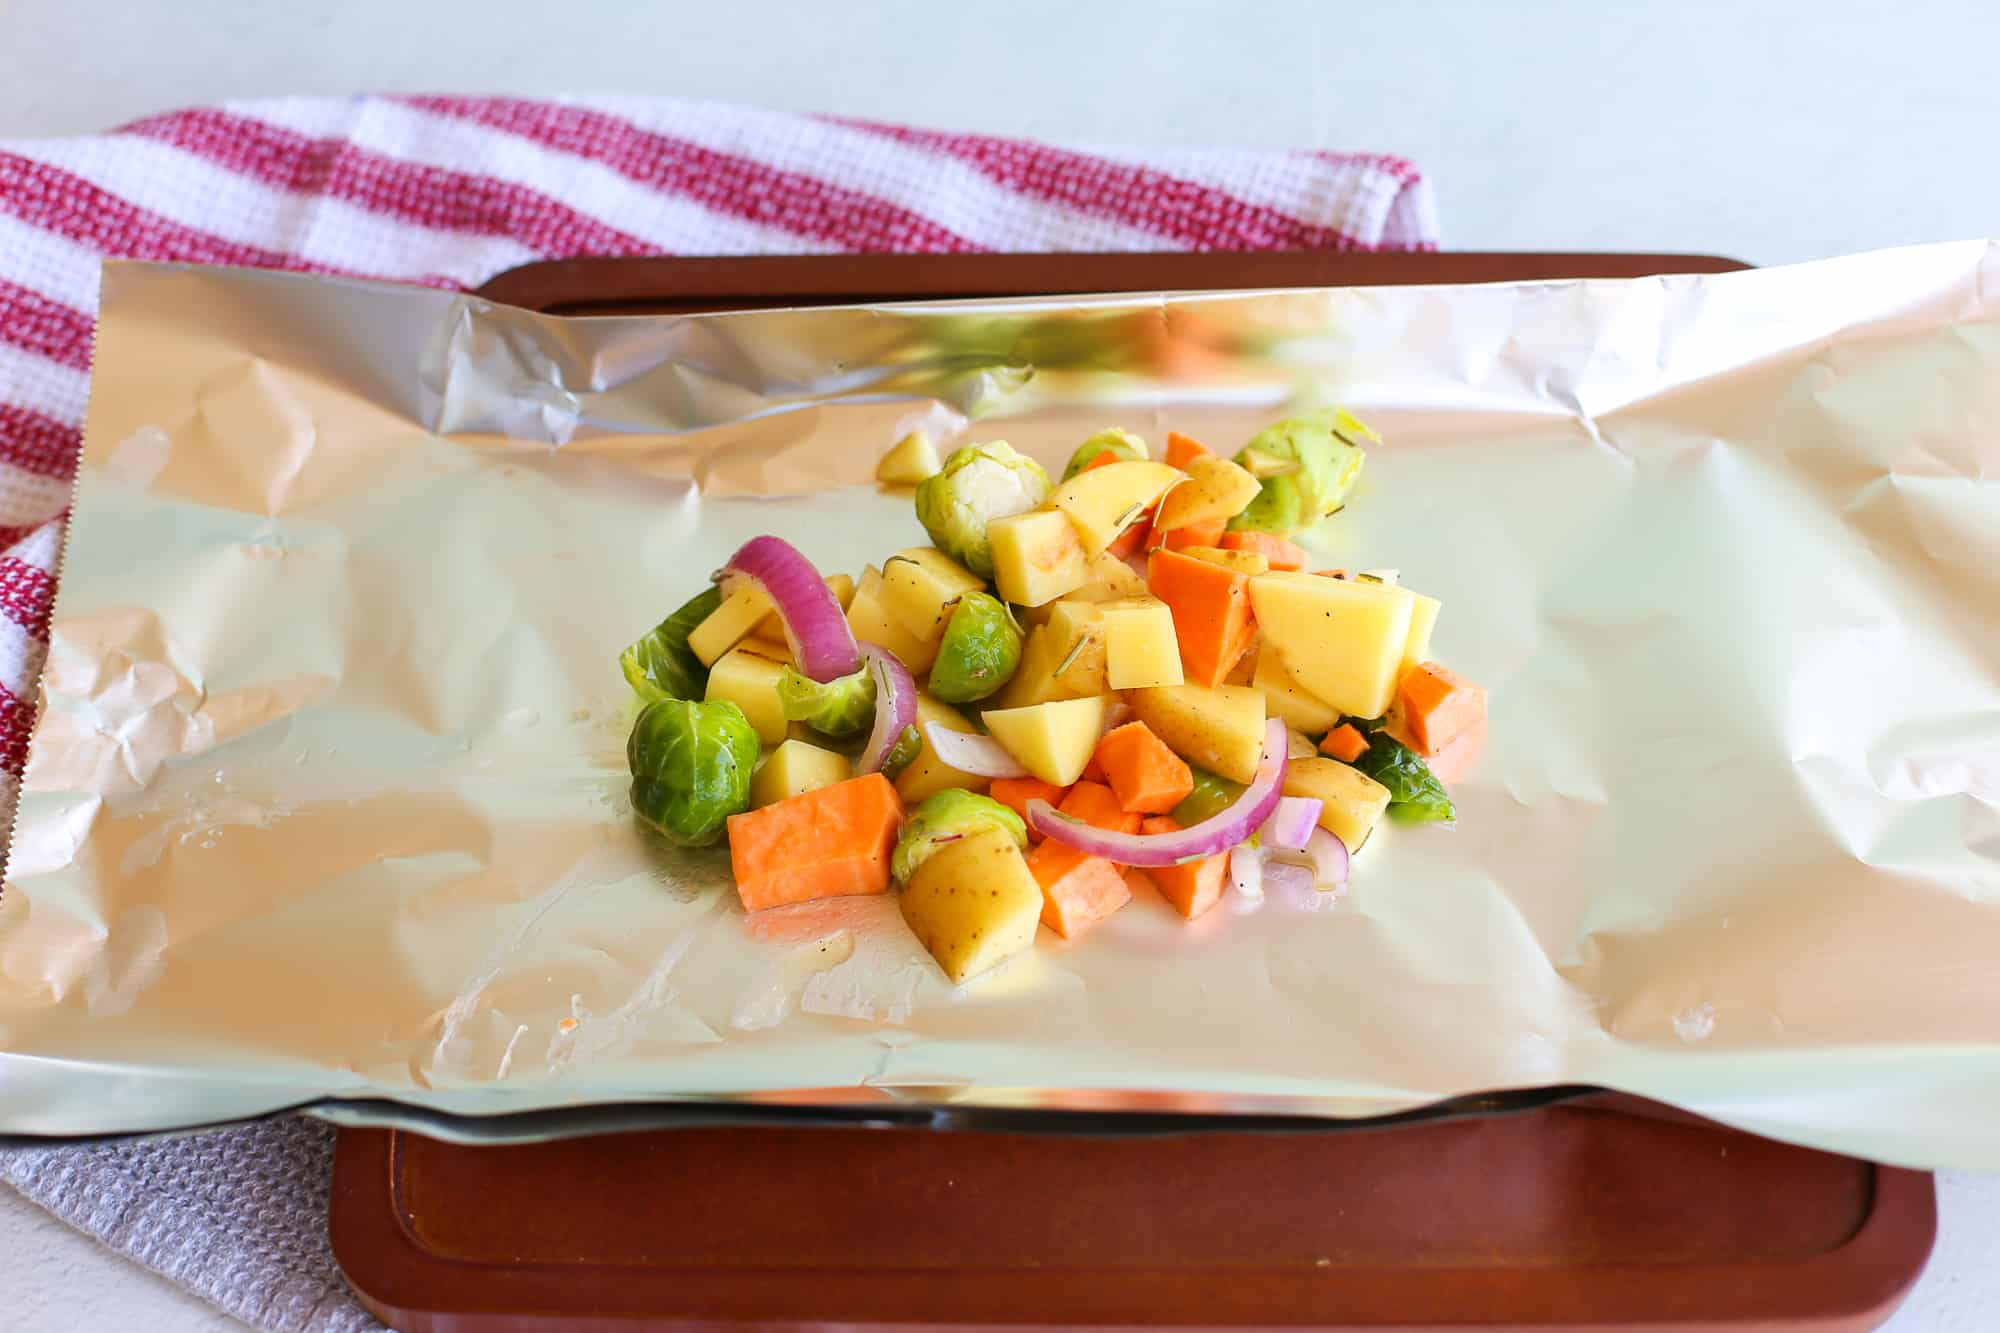 Foil square with veggies on it ready to be folded and put on the grill.